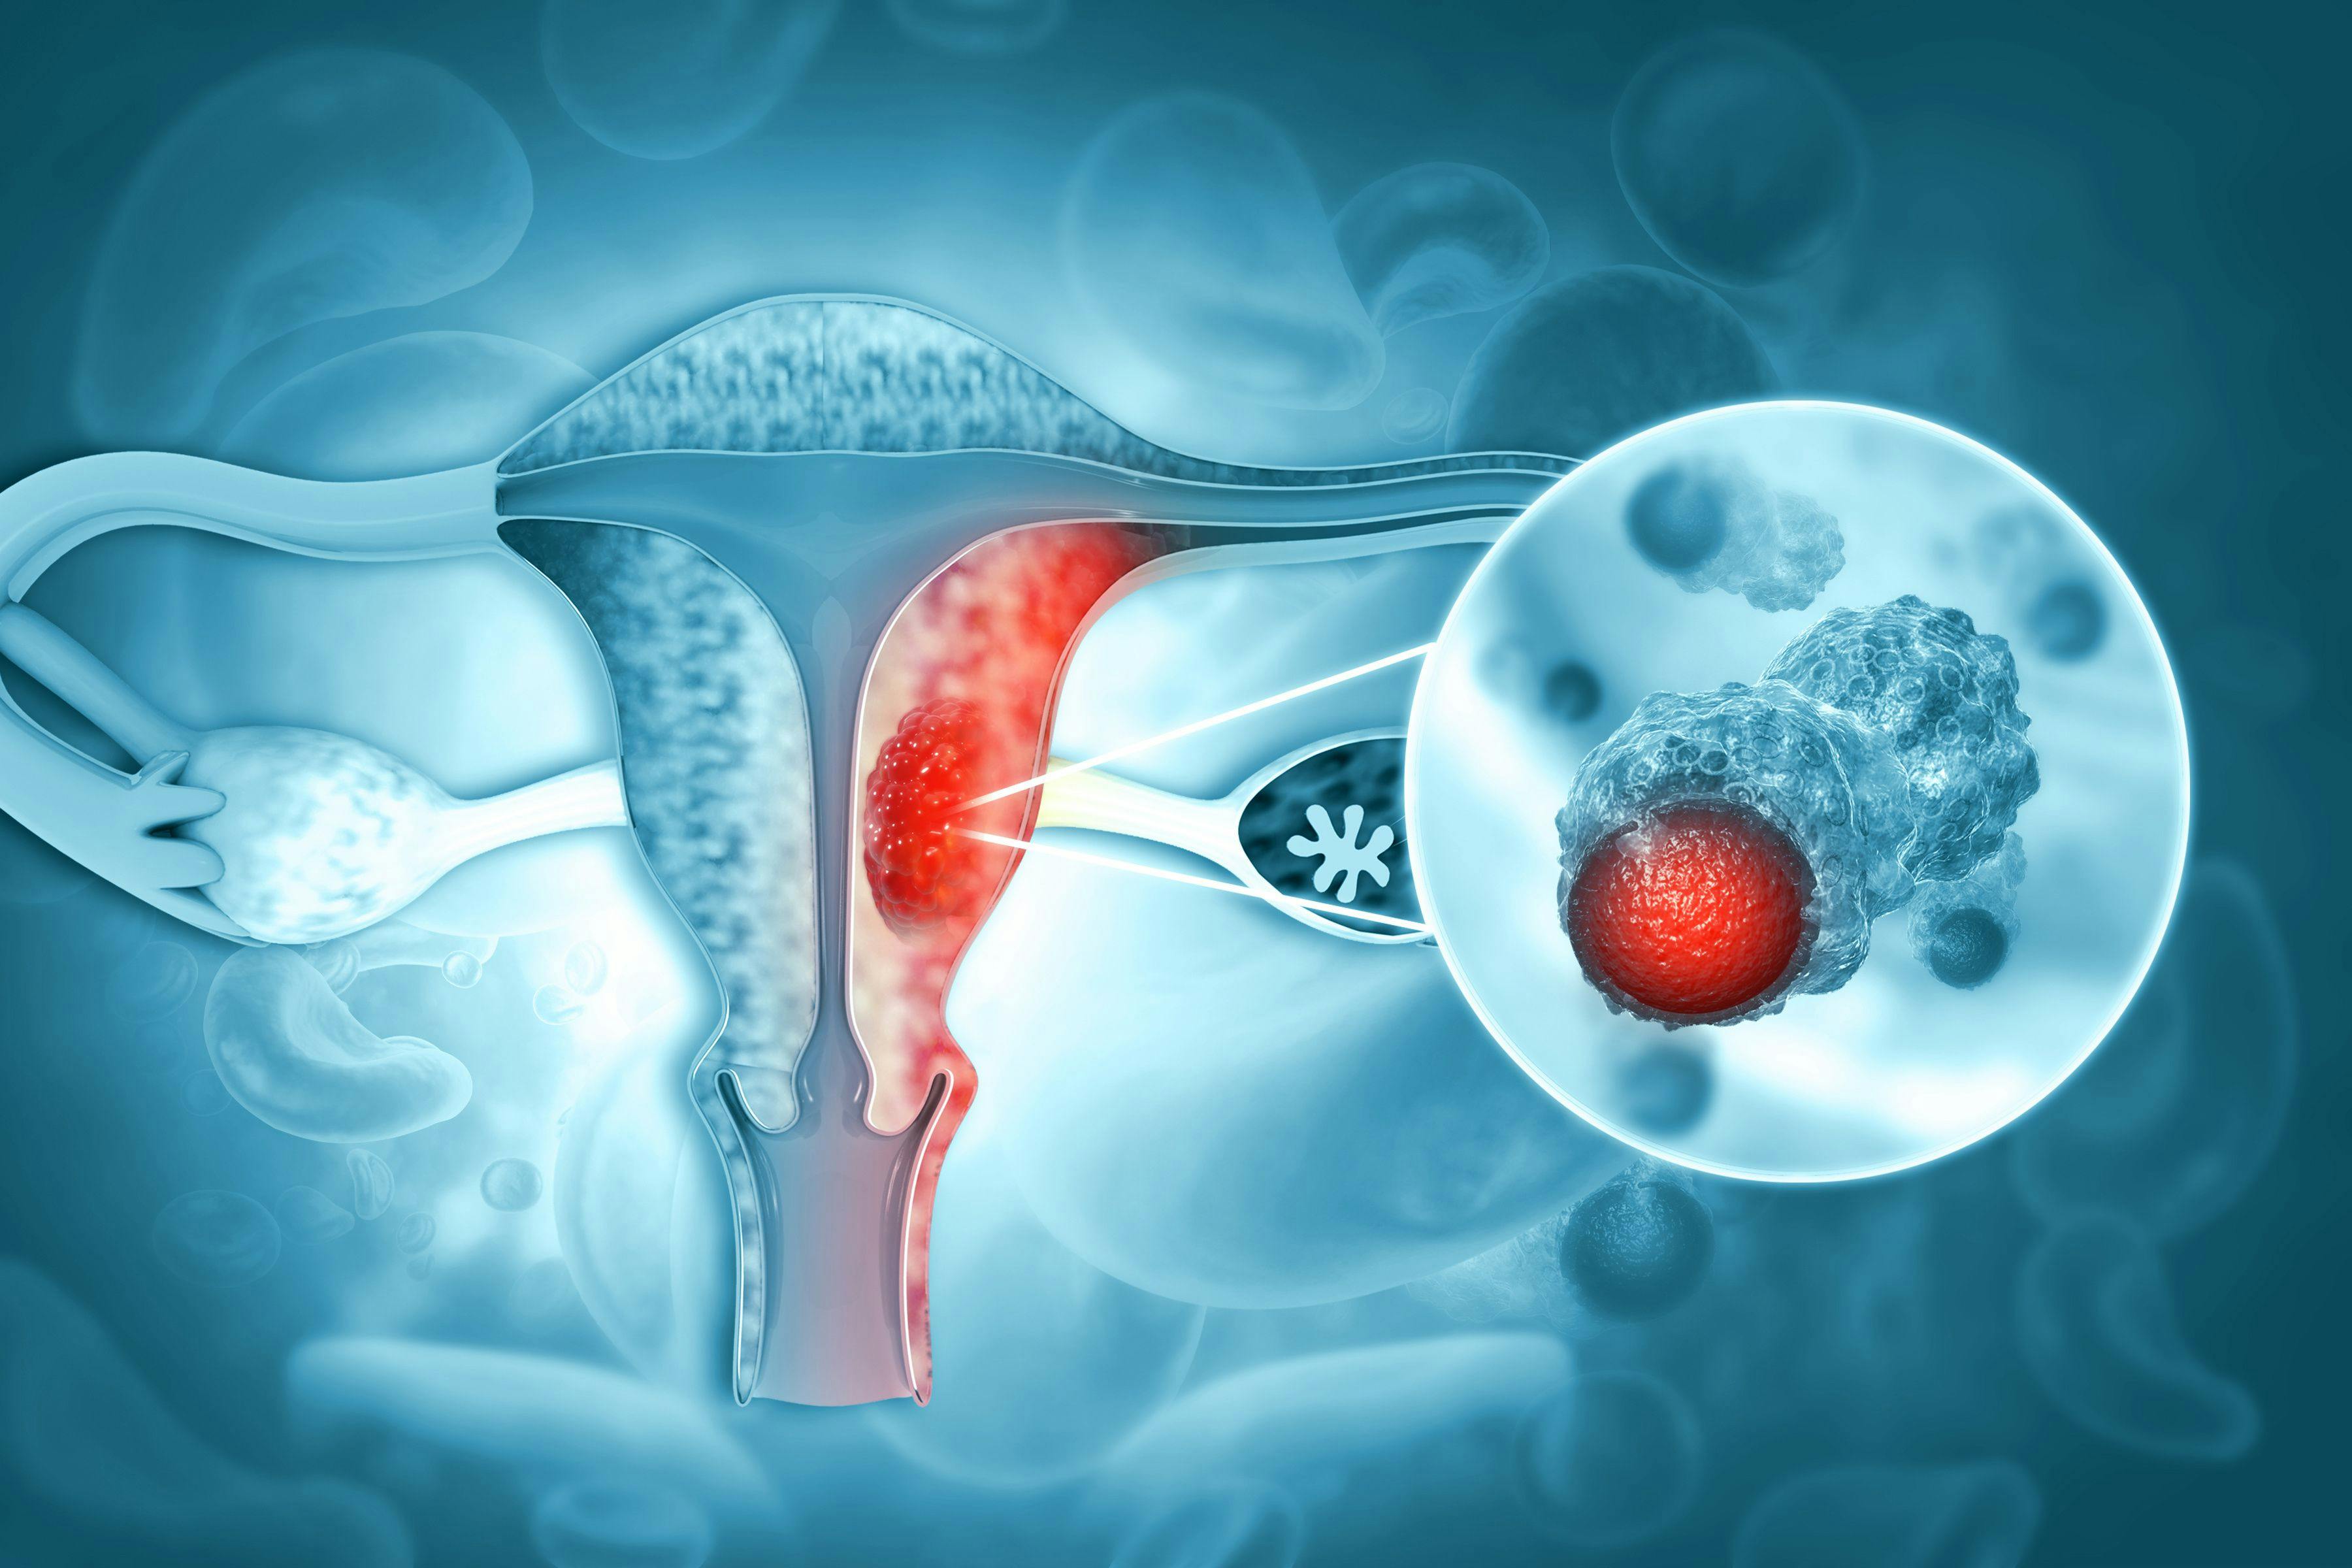 Female reproductive system diseases.uterus cancer and endometrial malignant tumor as a uterine medical concept.3d illustration | Image Credit: © Crystal light - stock.adobe.com